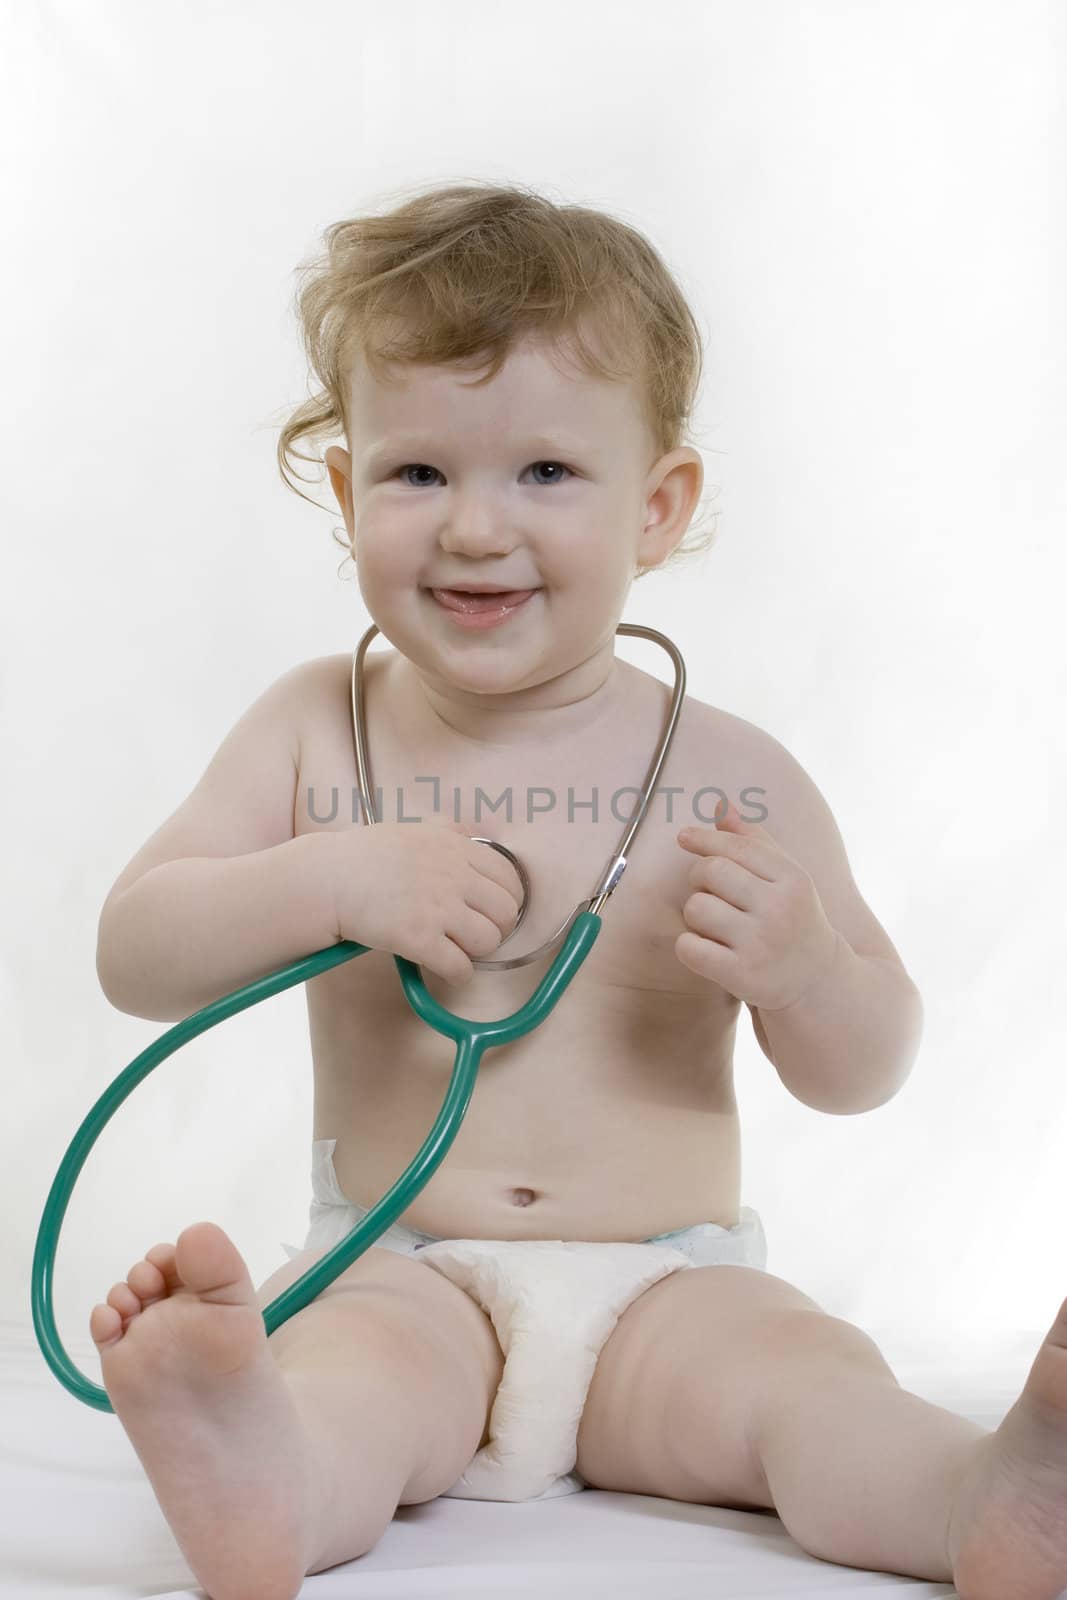 Child with a green stethoscope